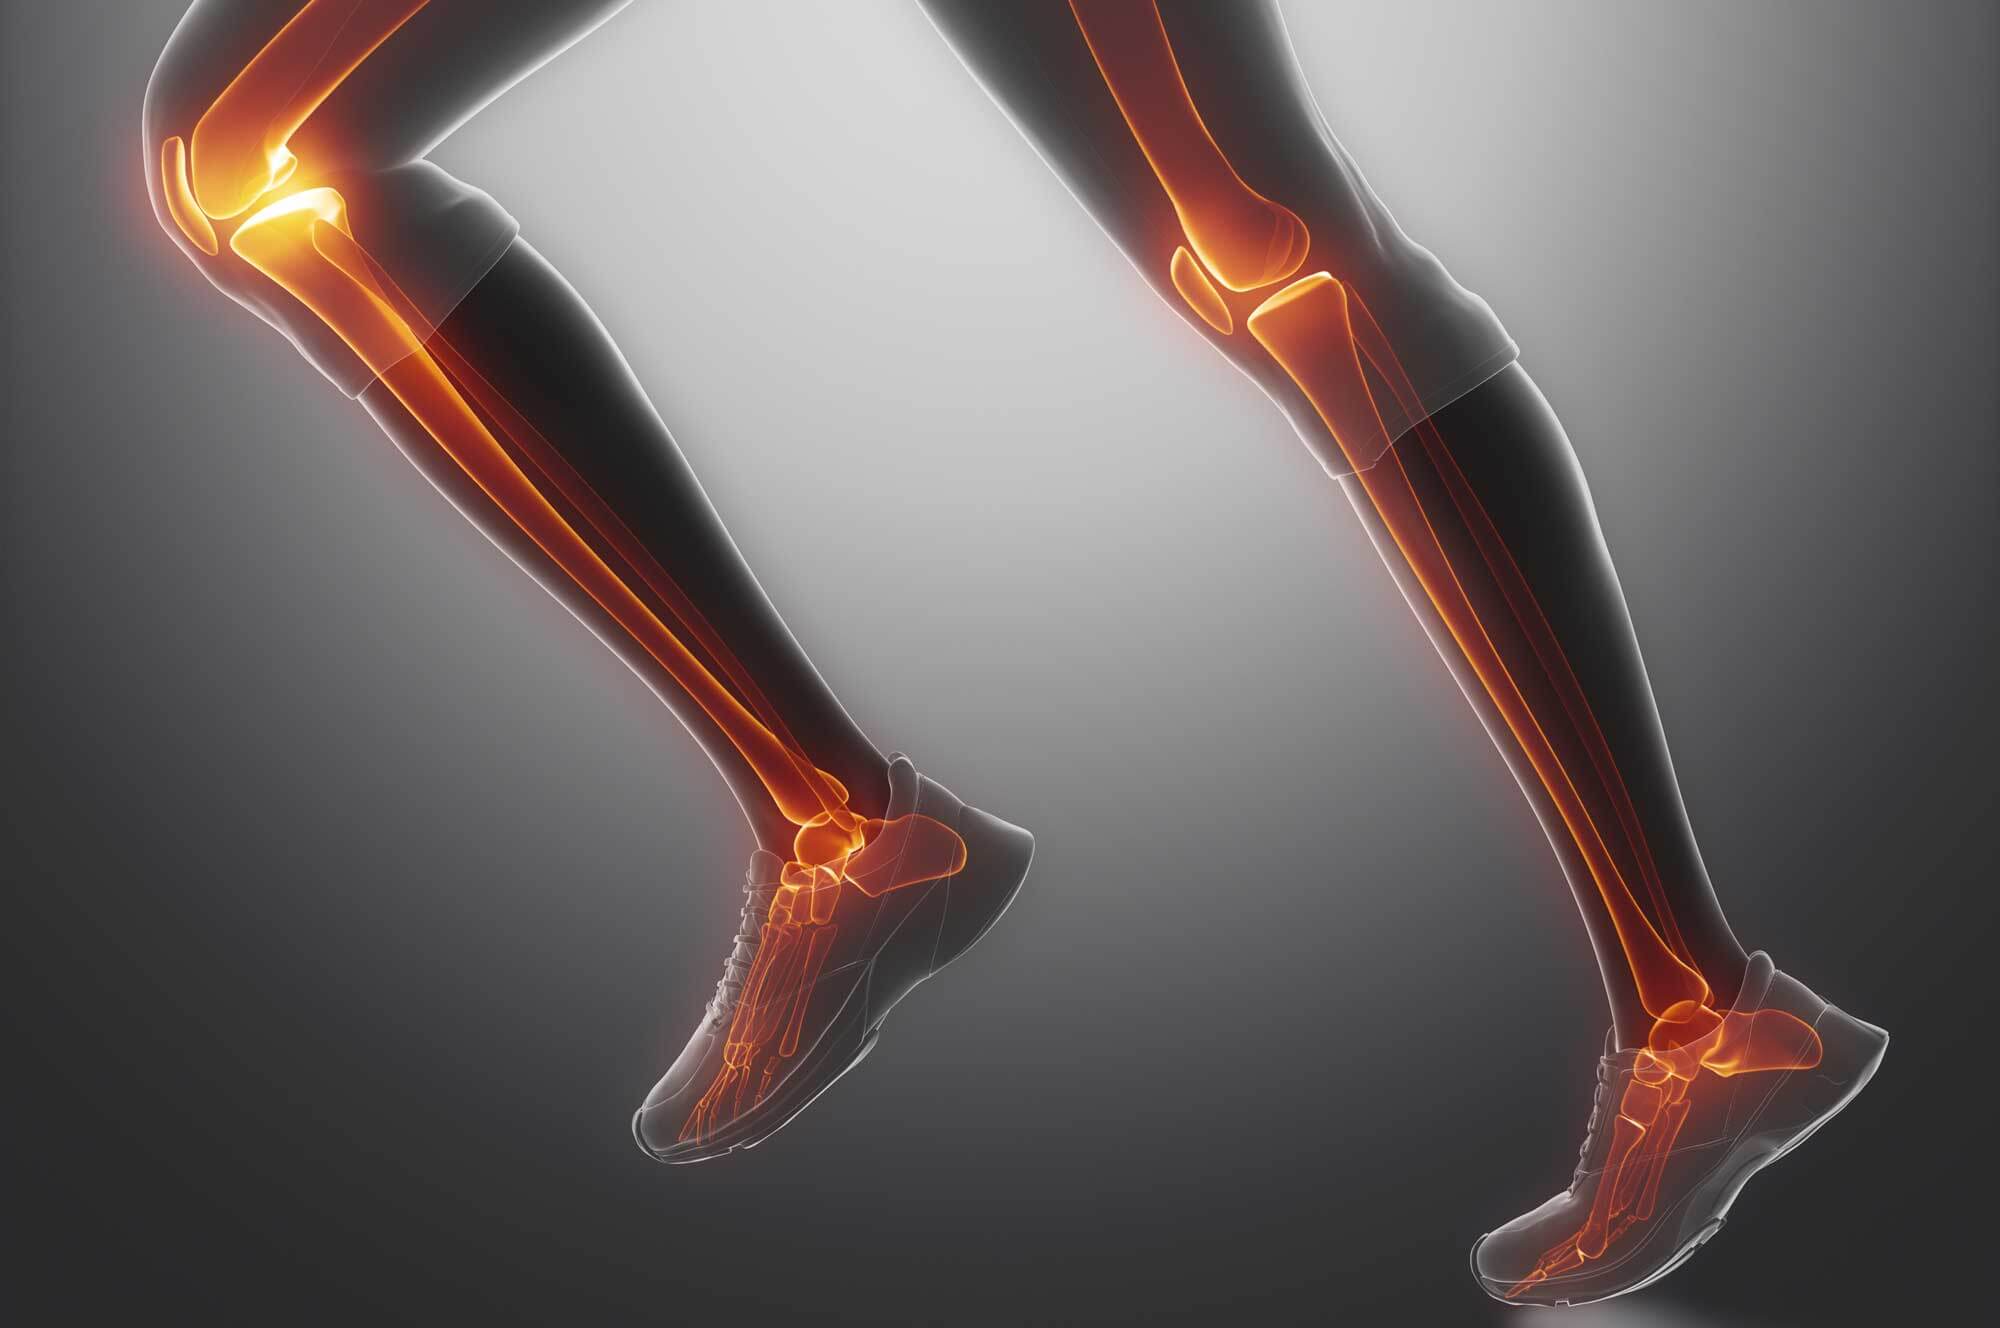 Square One - Running Gait Analysis Rehabilitation: Image showing legs in running position similar to an xray